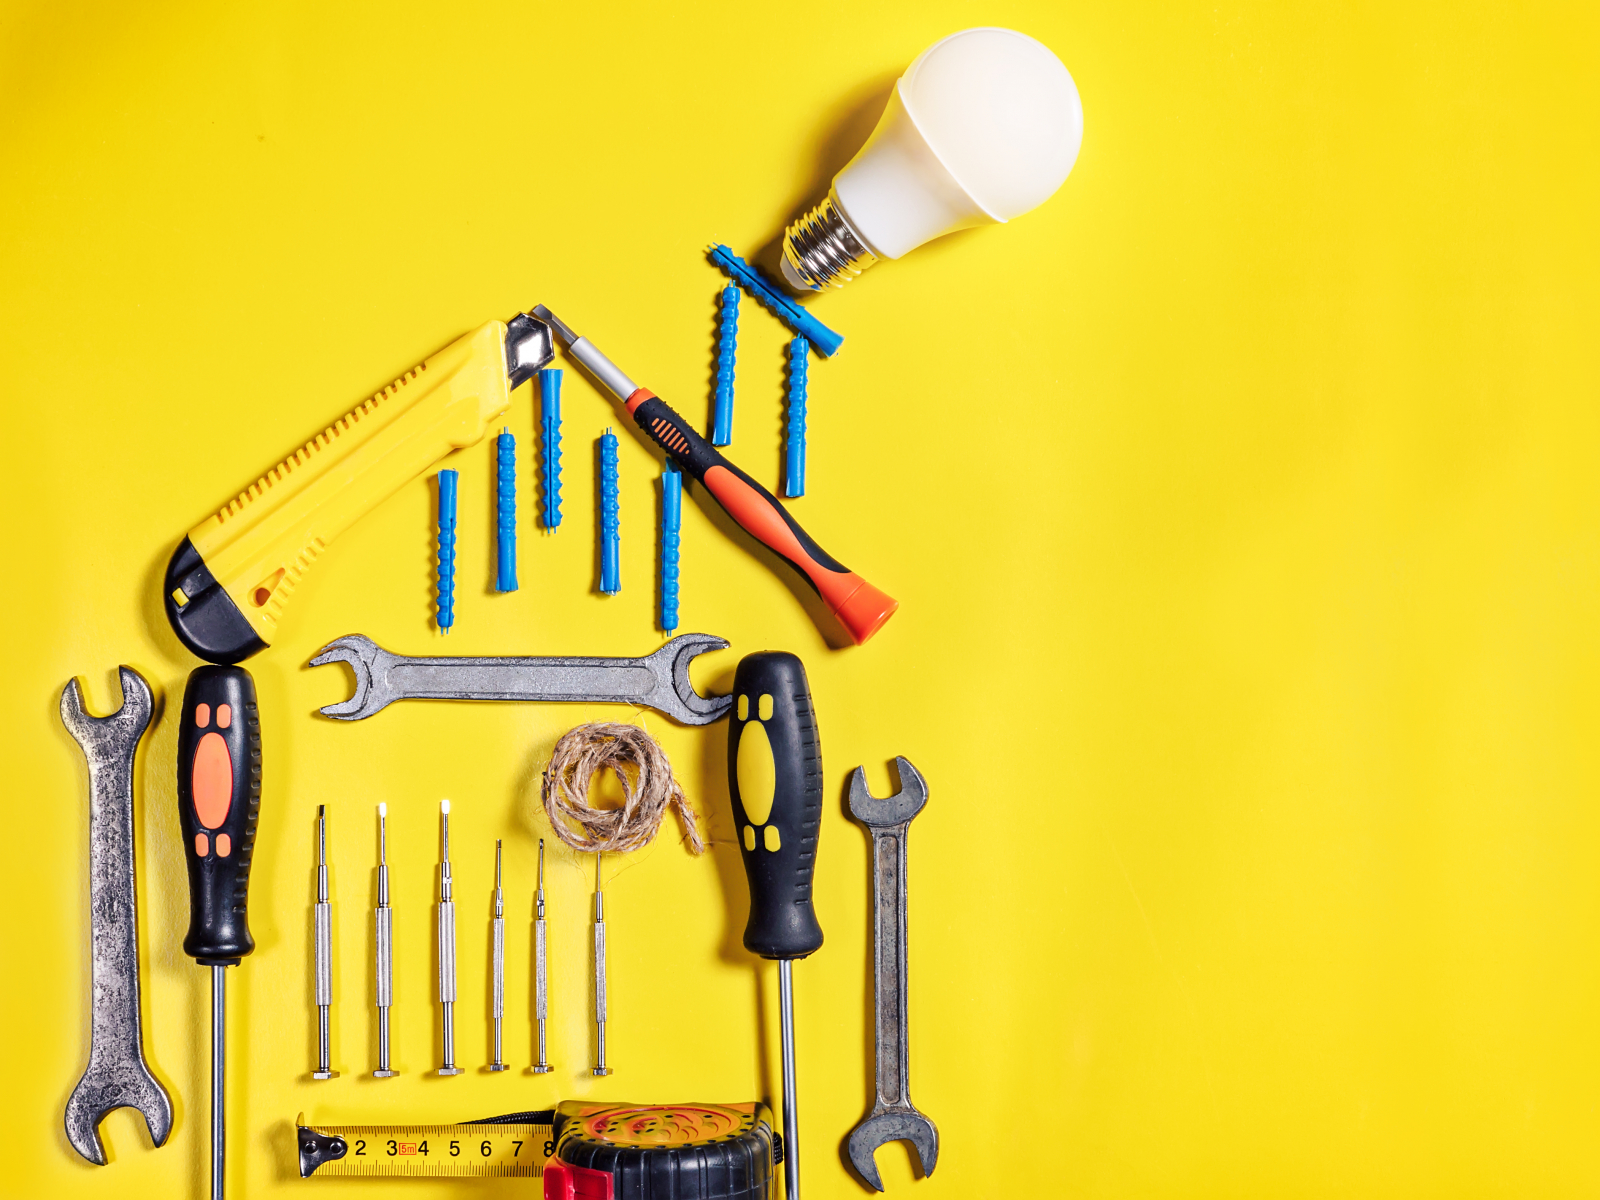 Tools hanging on yellow wall